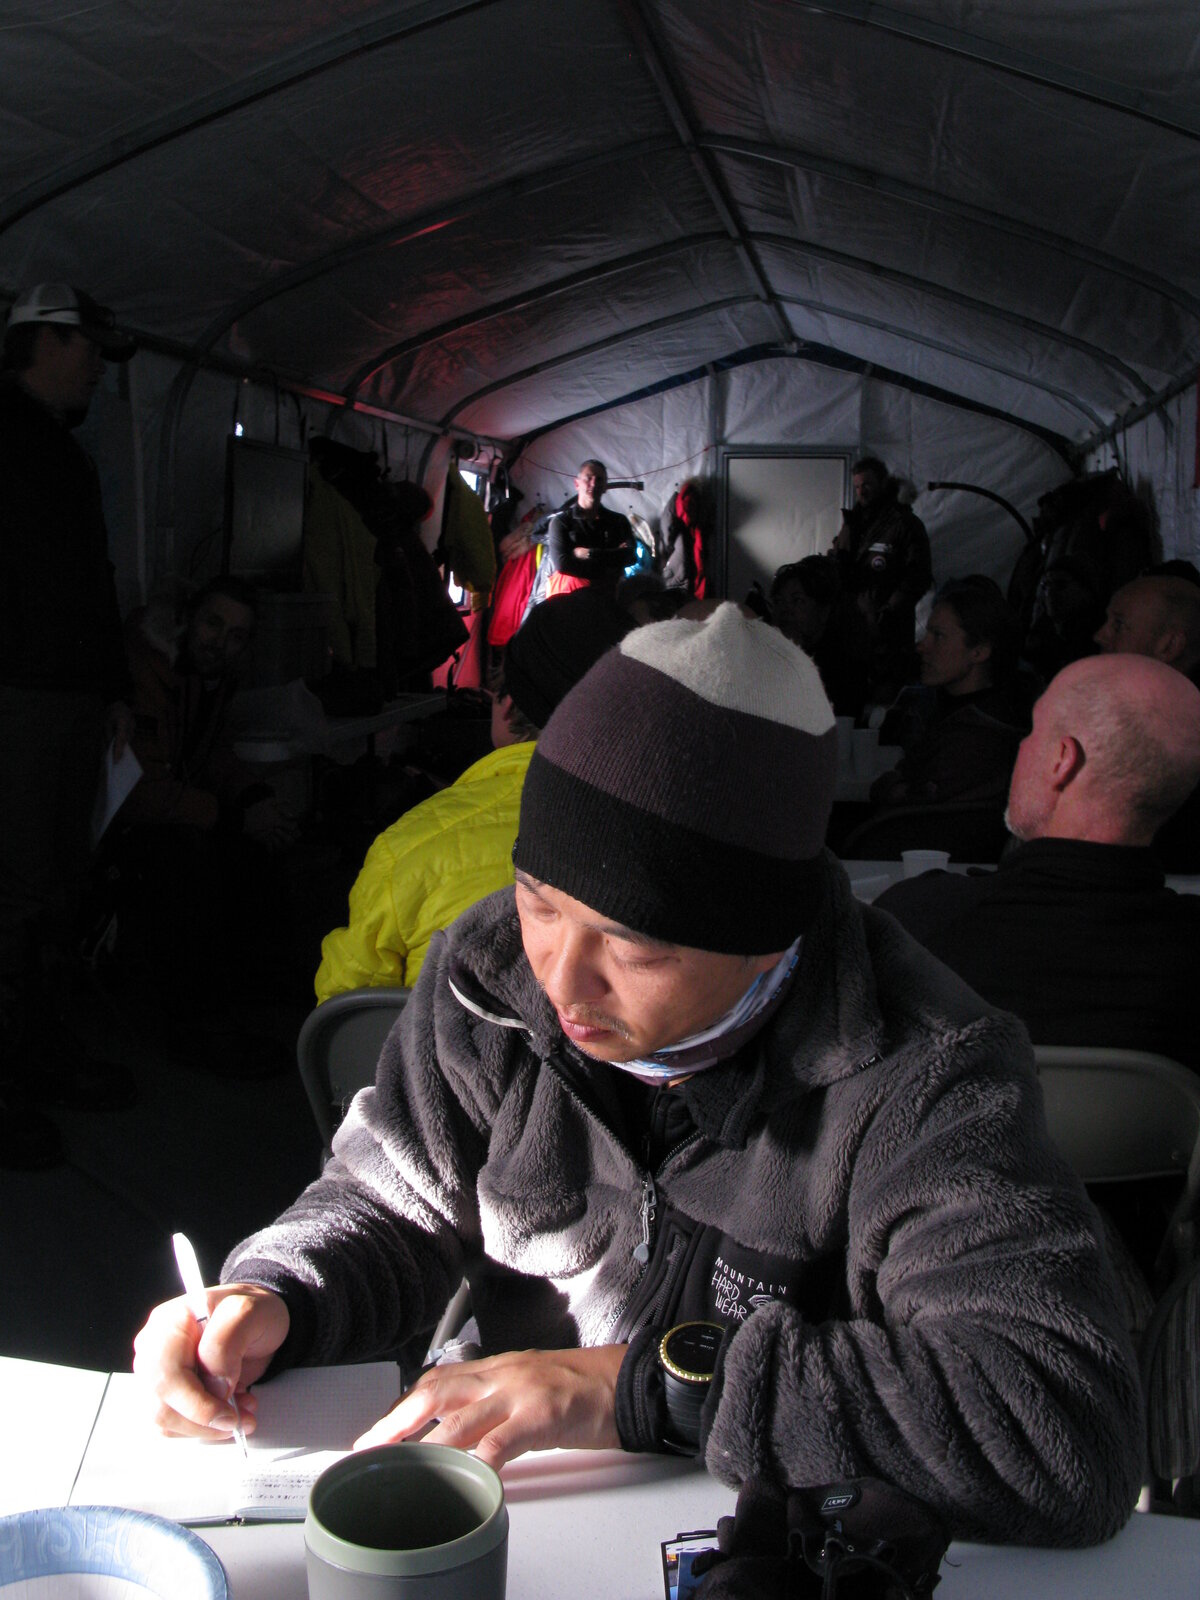 Guests journals inside dining tent at ALE's South Pole Camp